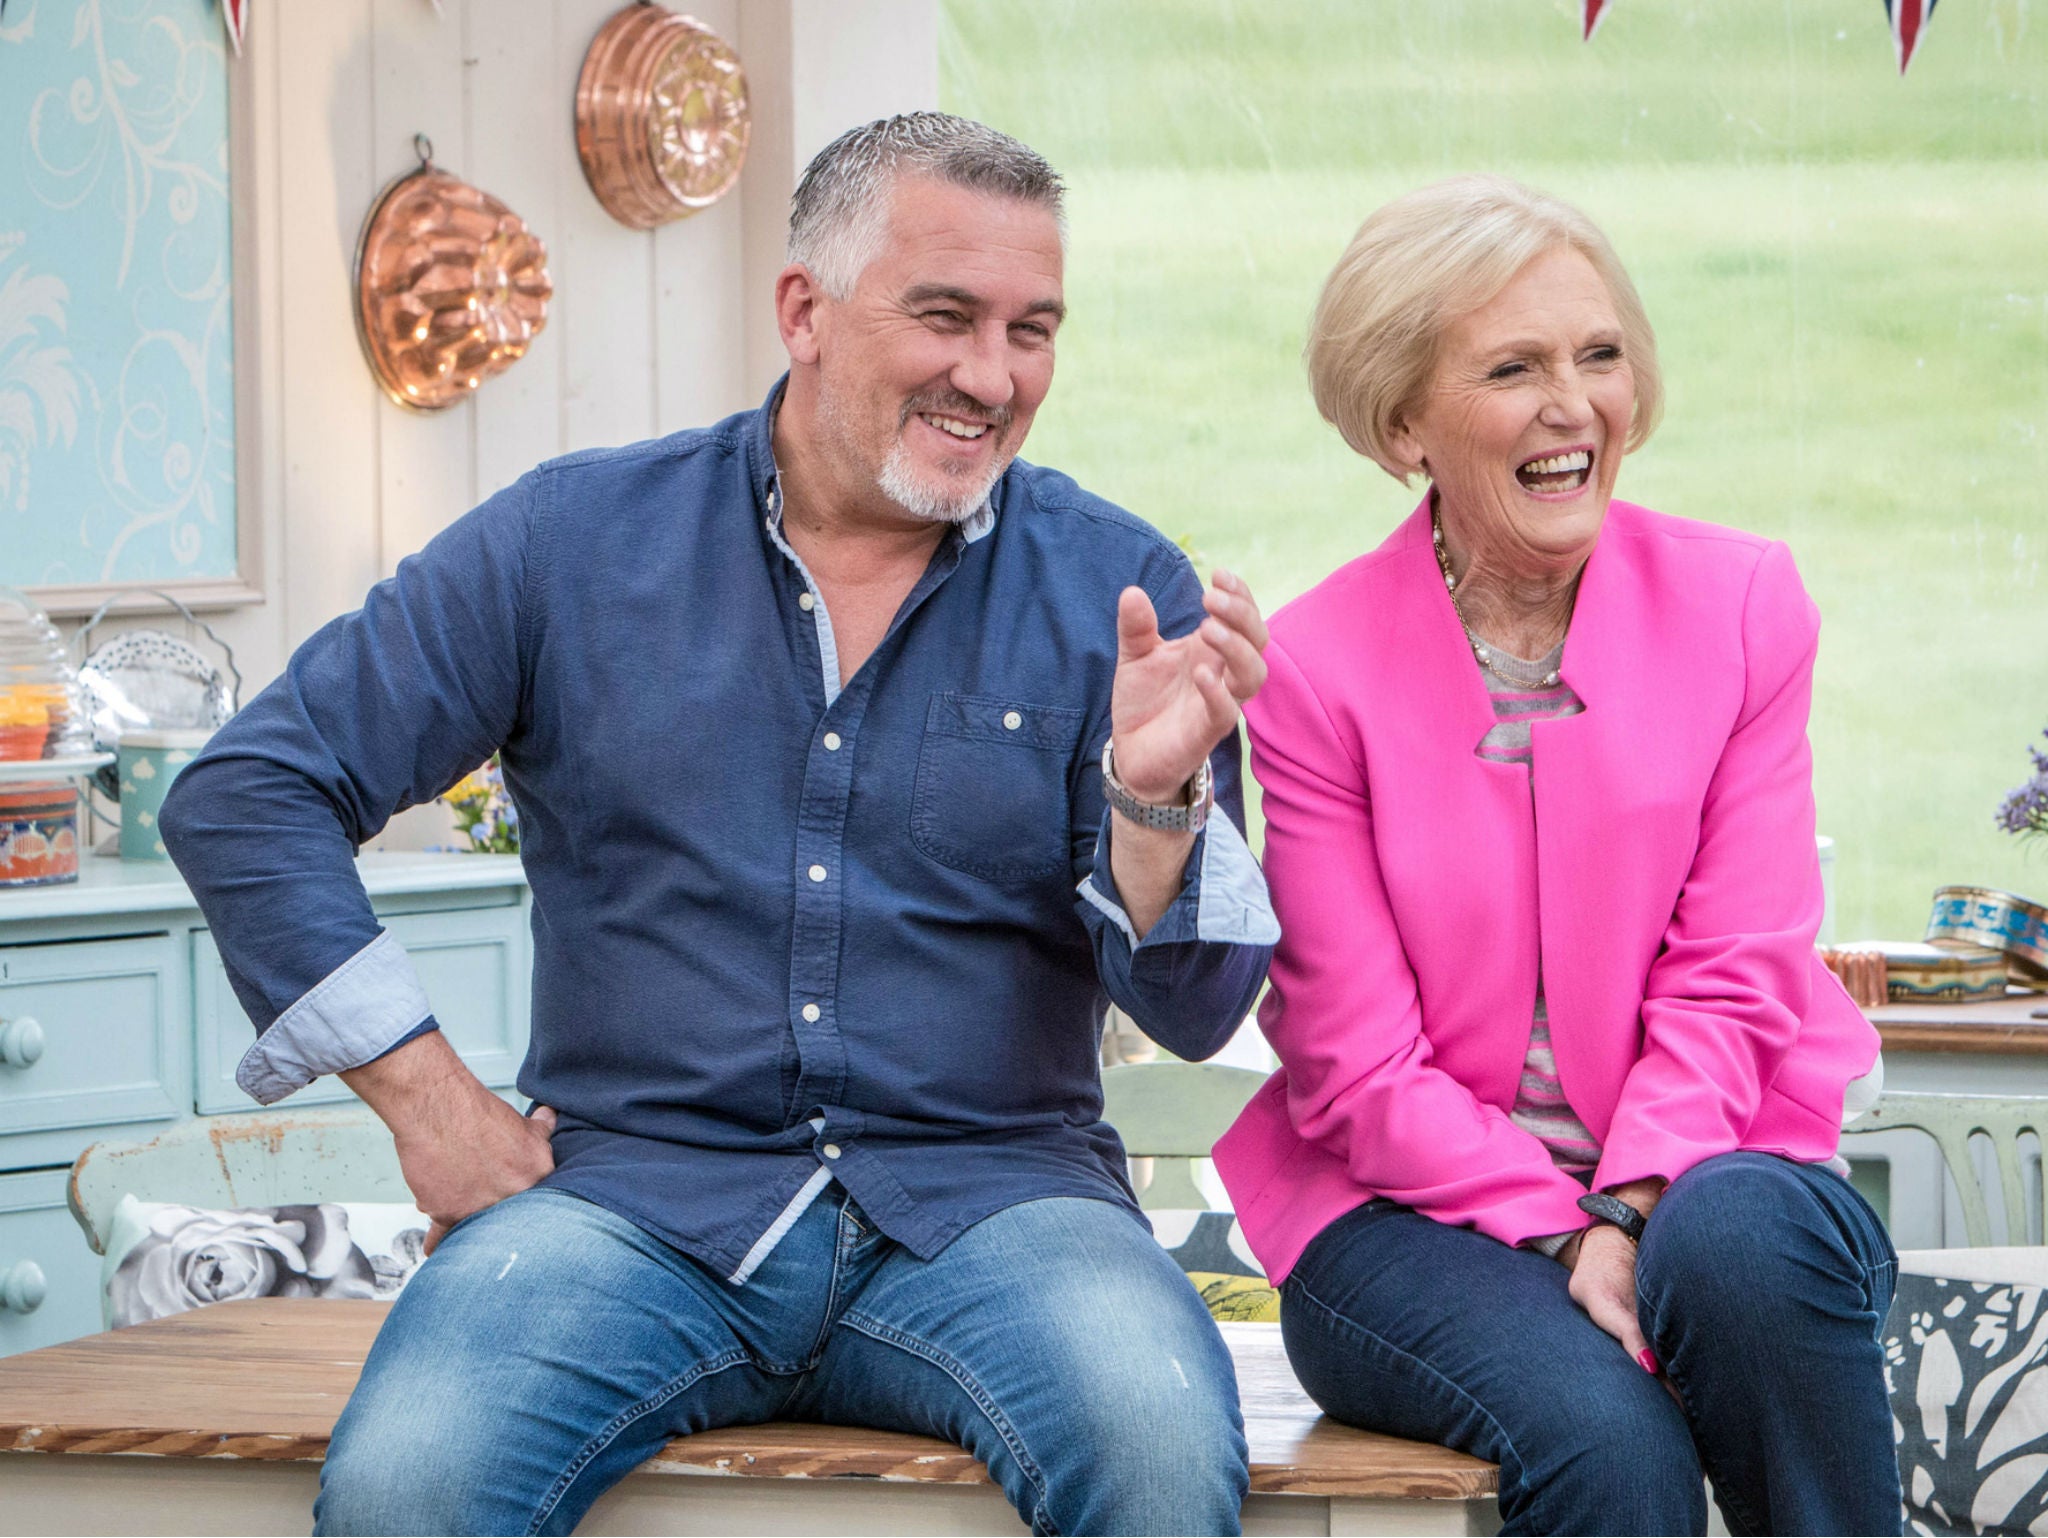 Paul Hollywood and Mary Berry on the set of The Great British Bake Off series 5